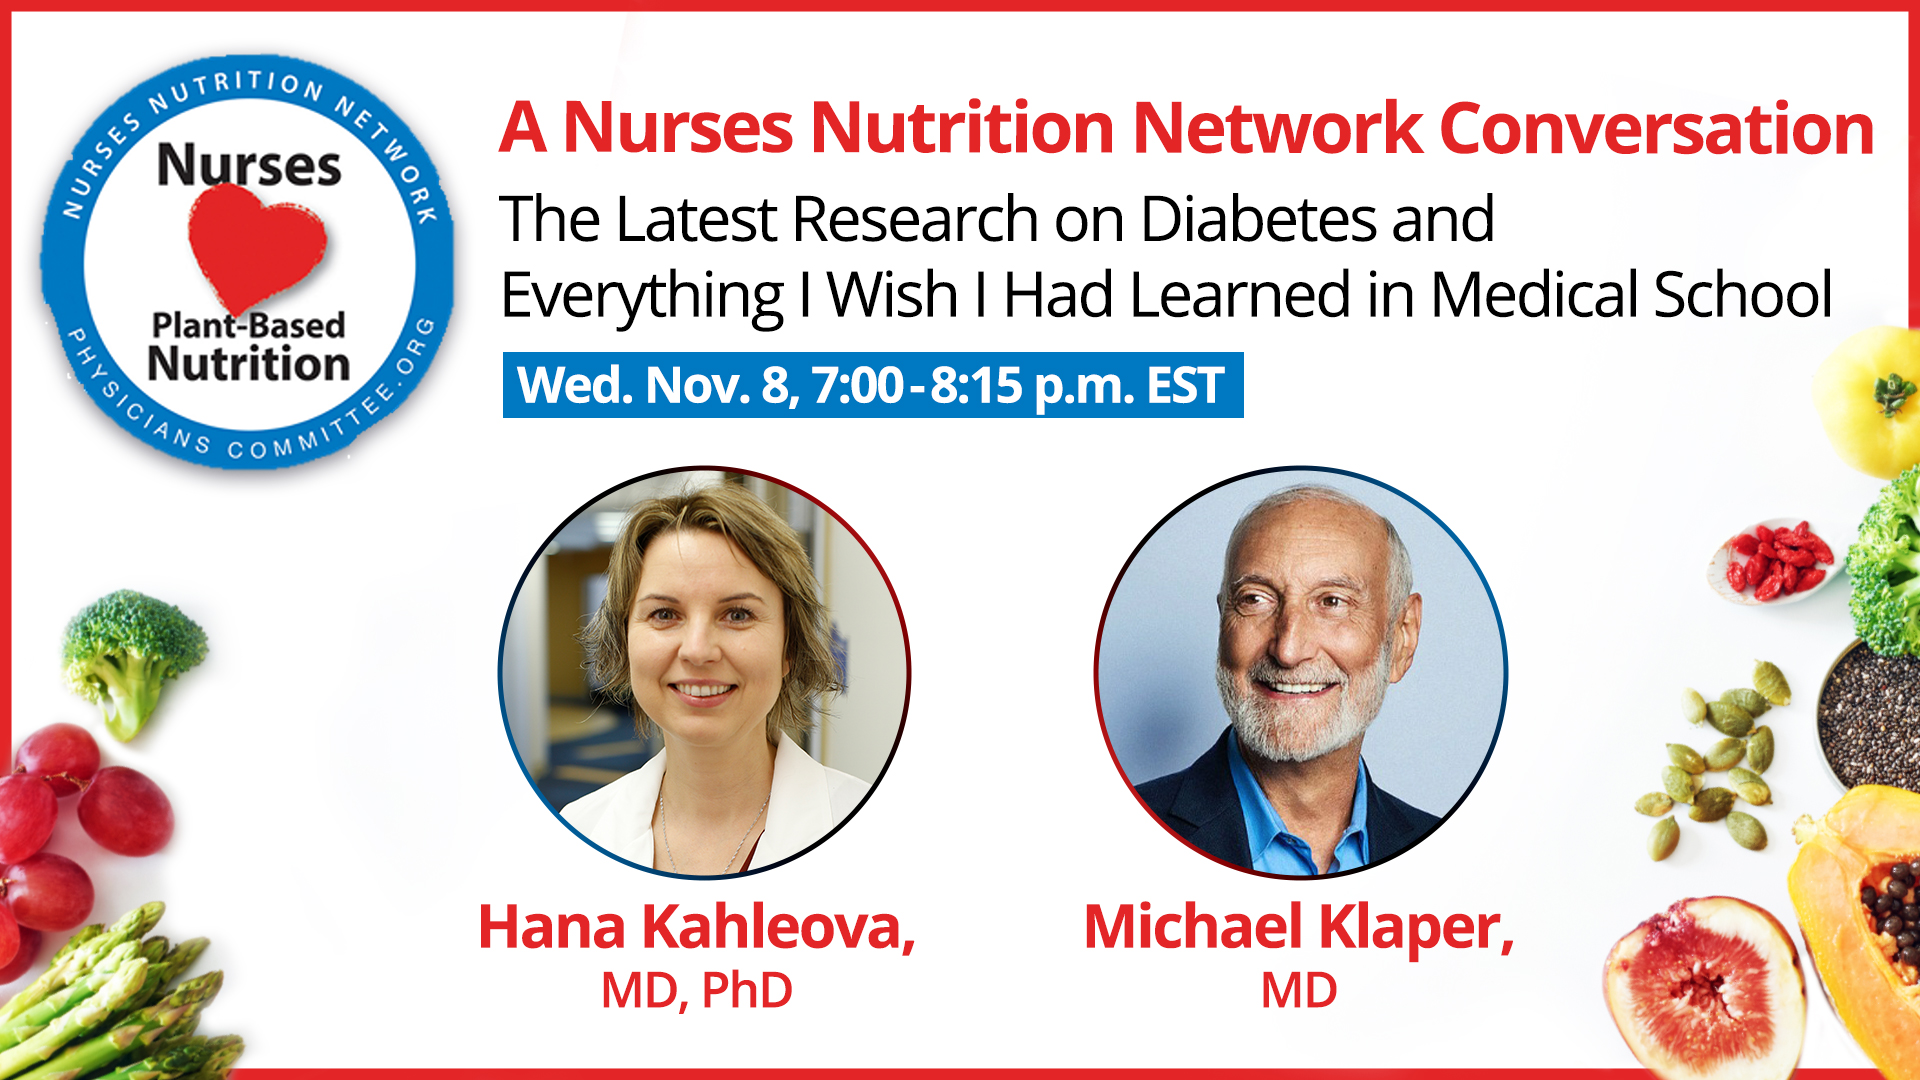 A Nurses Nutrition Network  Conversation on the Latest Research on Diabetes and Everything I Wished I Had Learned in Medical School